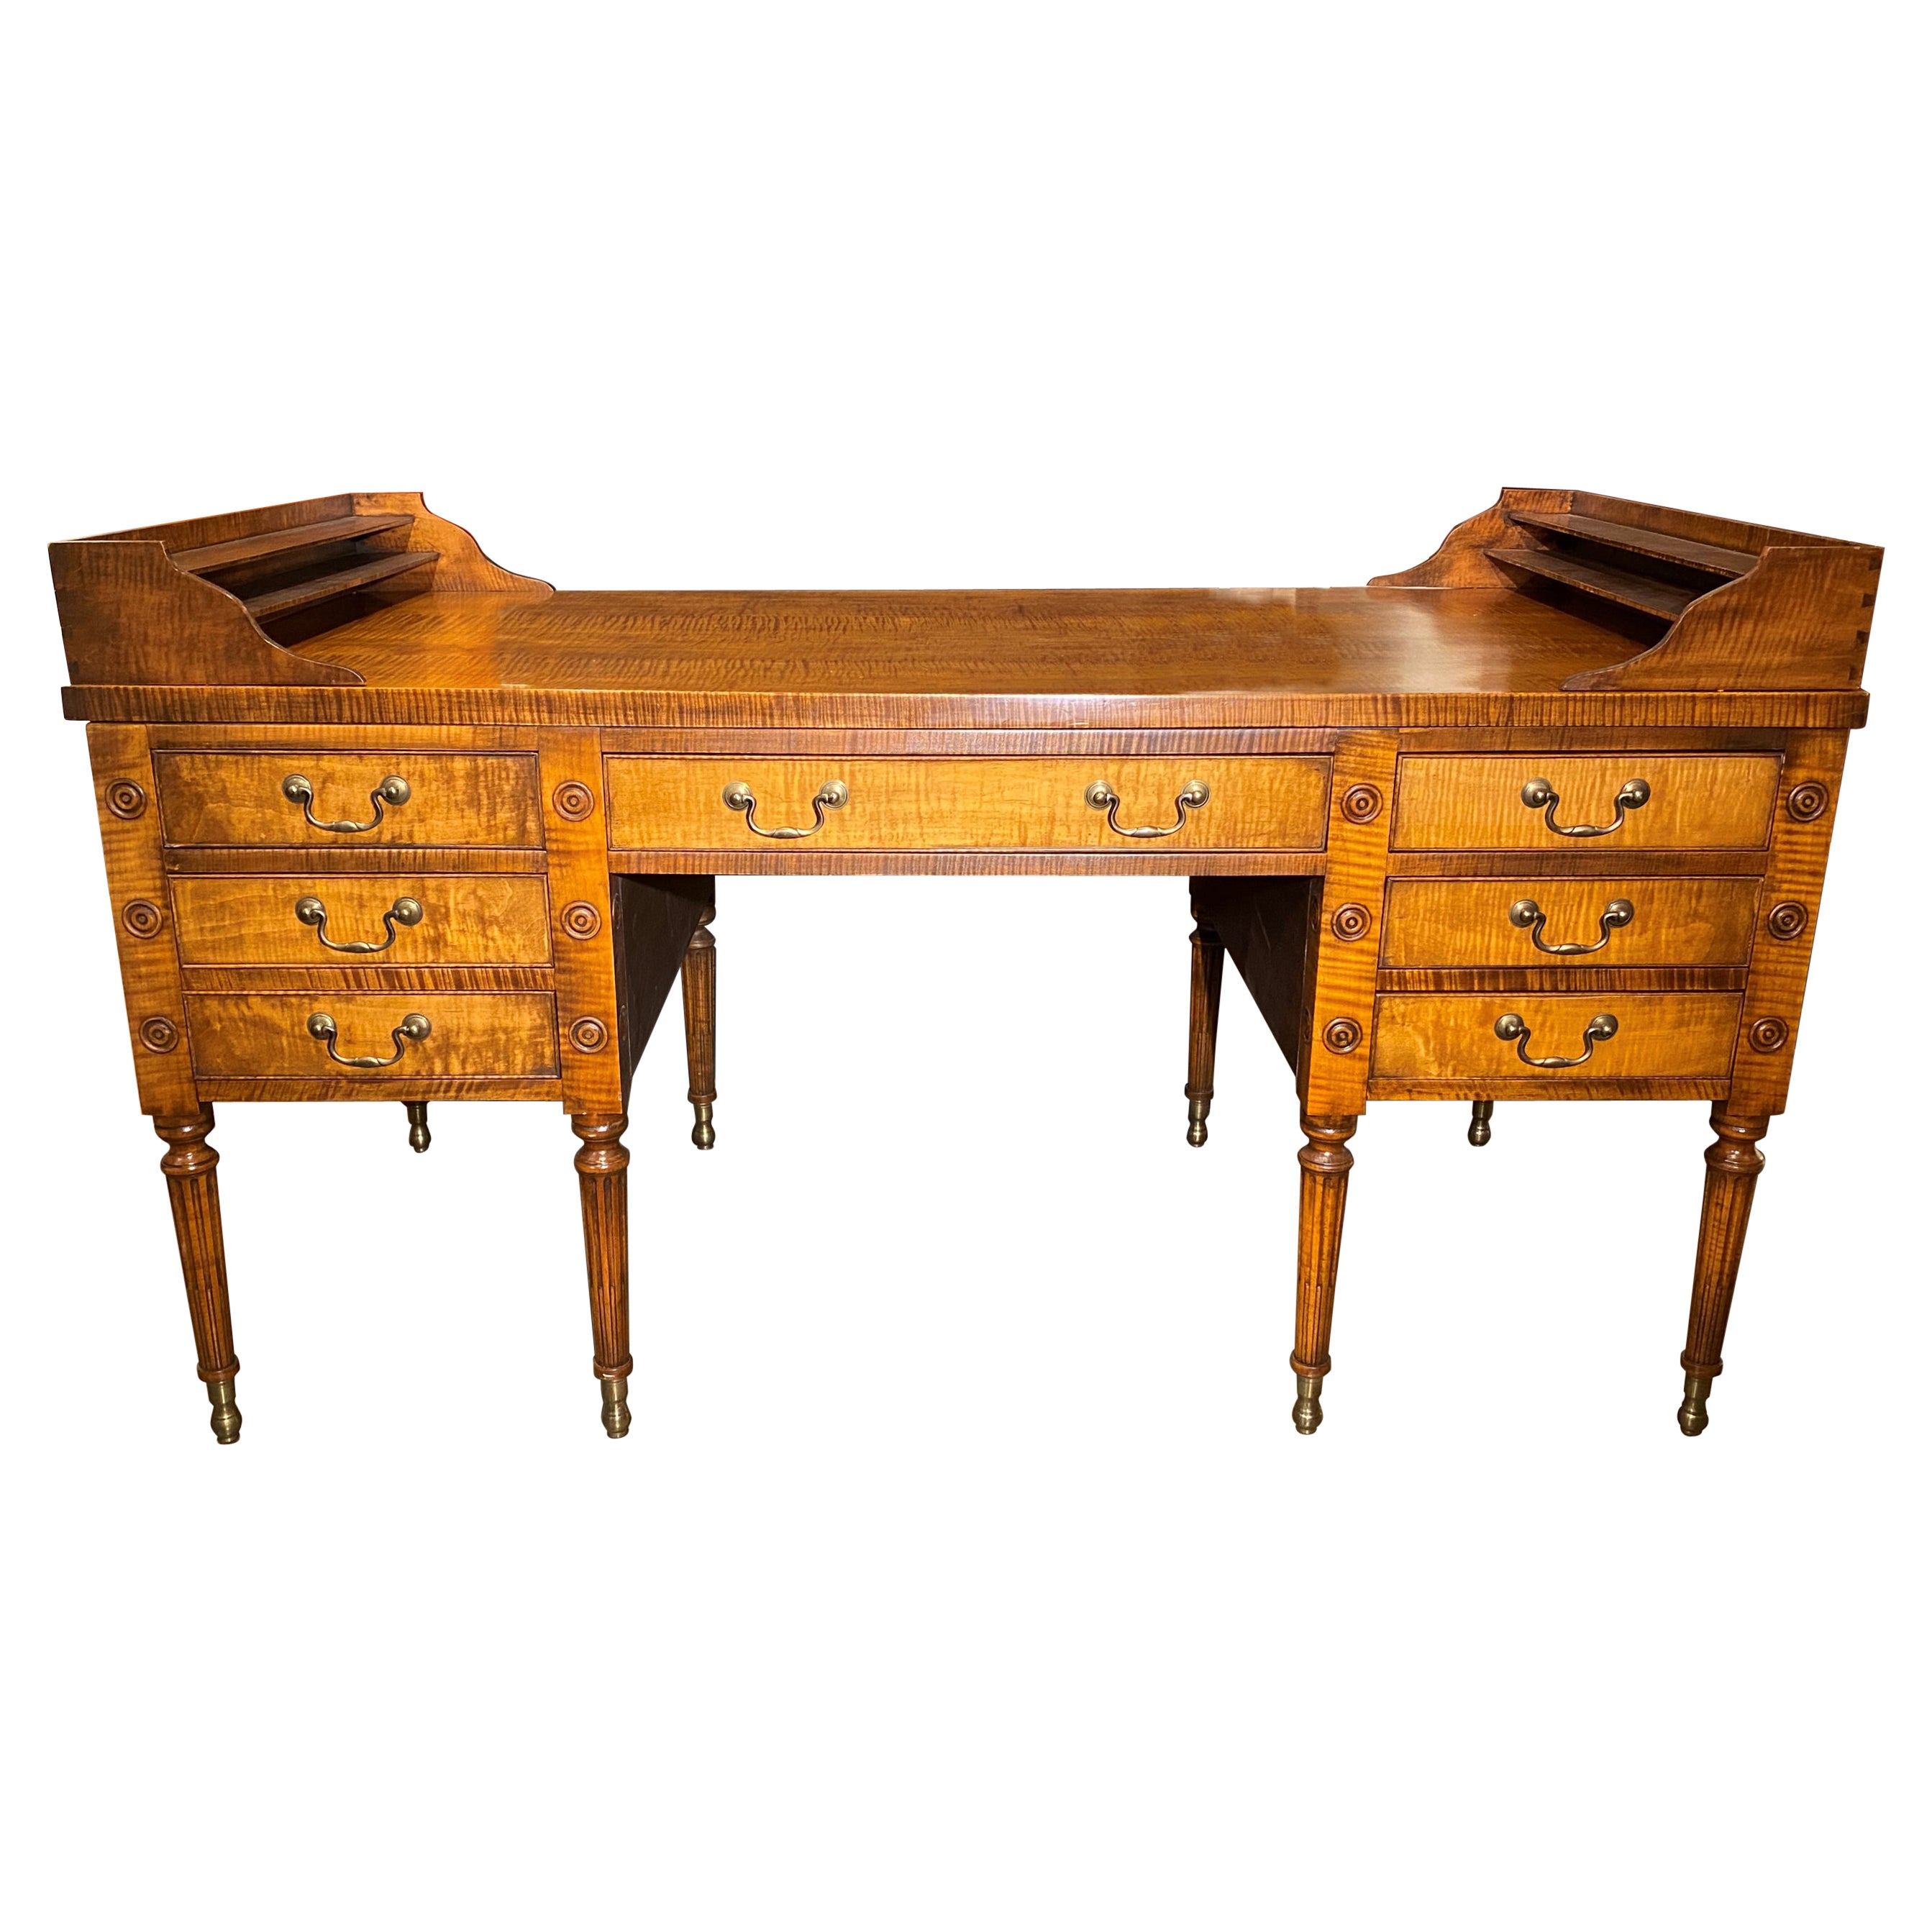 Exceptional Bench Made George Washington Desk in Tiger Maple